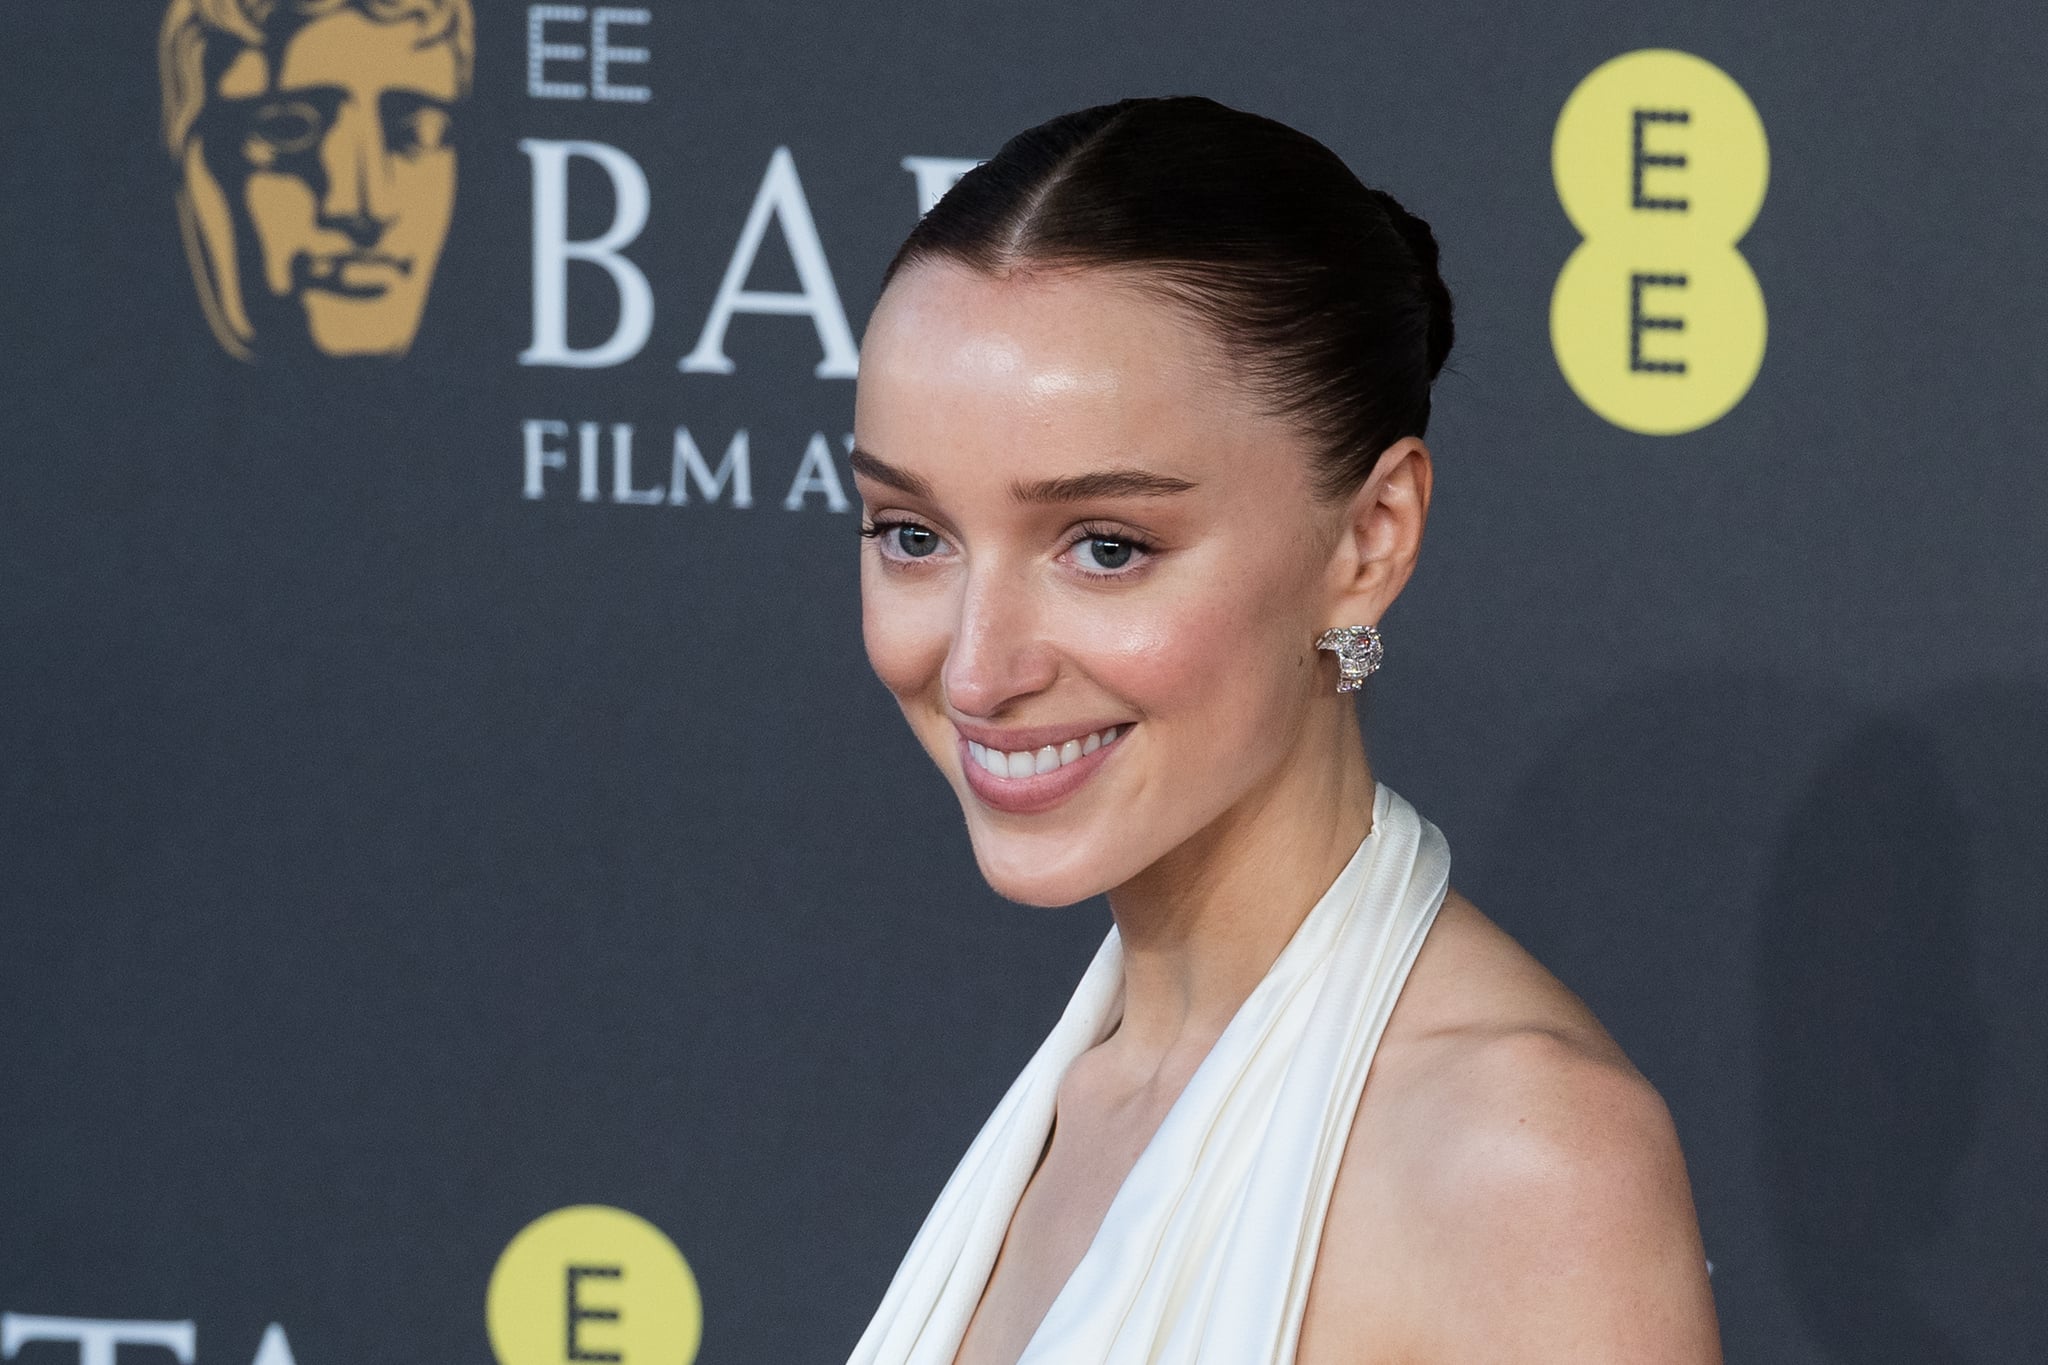  Phoebe Dynevor attends the EE BAFTA Film Awards ceremony at The Royal Festival Hall in London, United Kingdom on February 18, 2024. (Photo credit should read Wiktor Szymanowicz/Future Publishing via Getty Images)